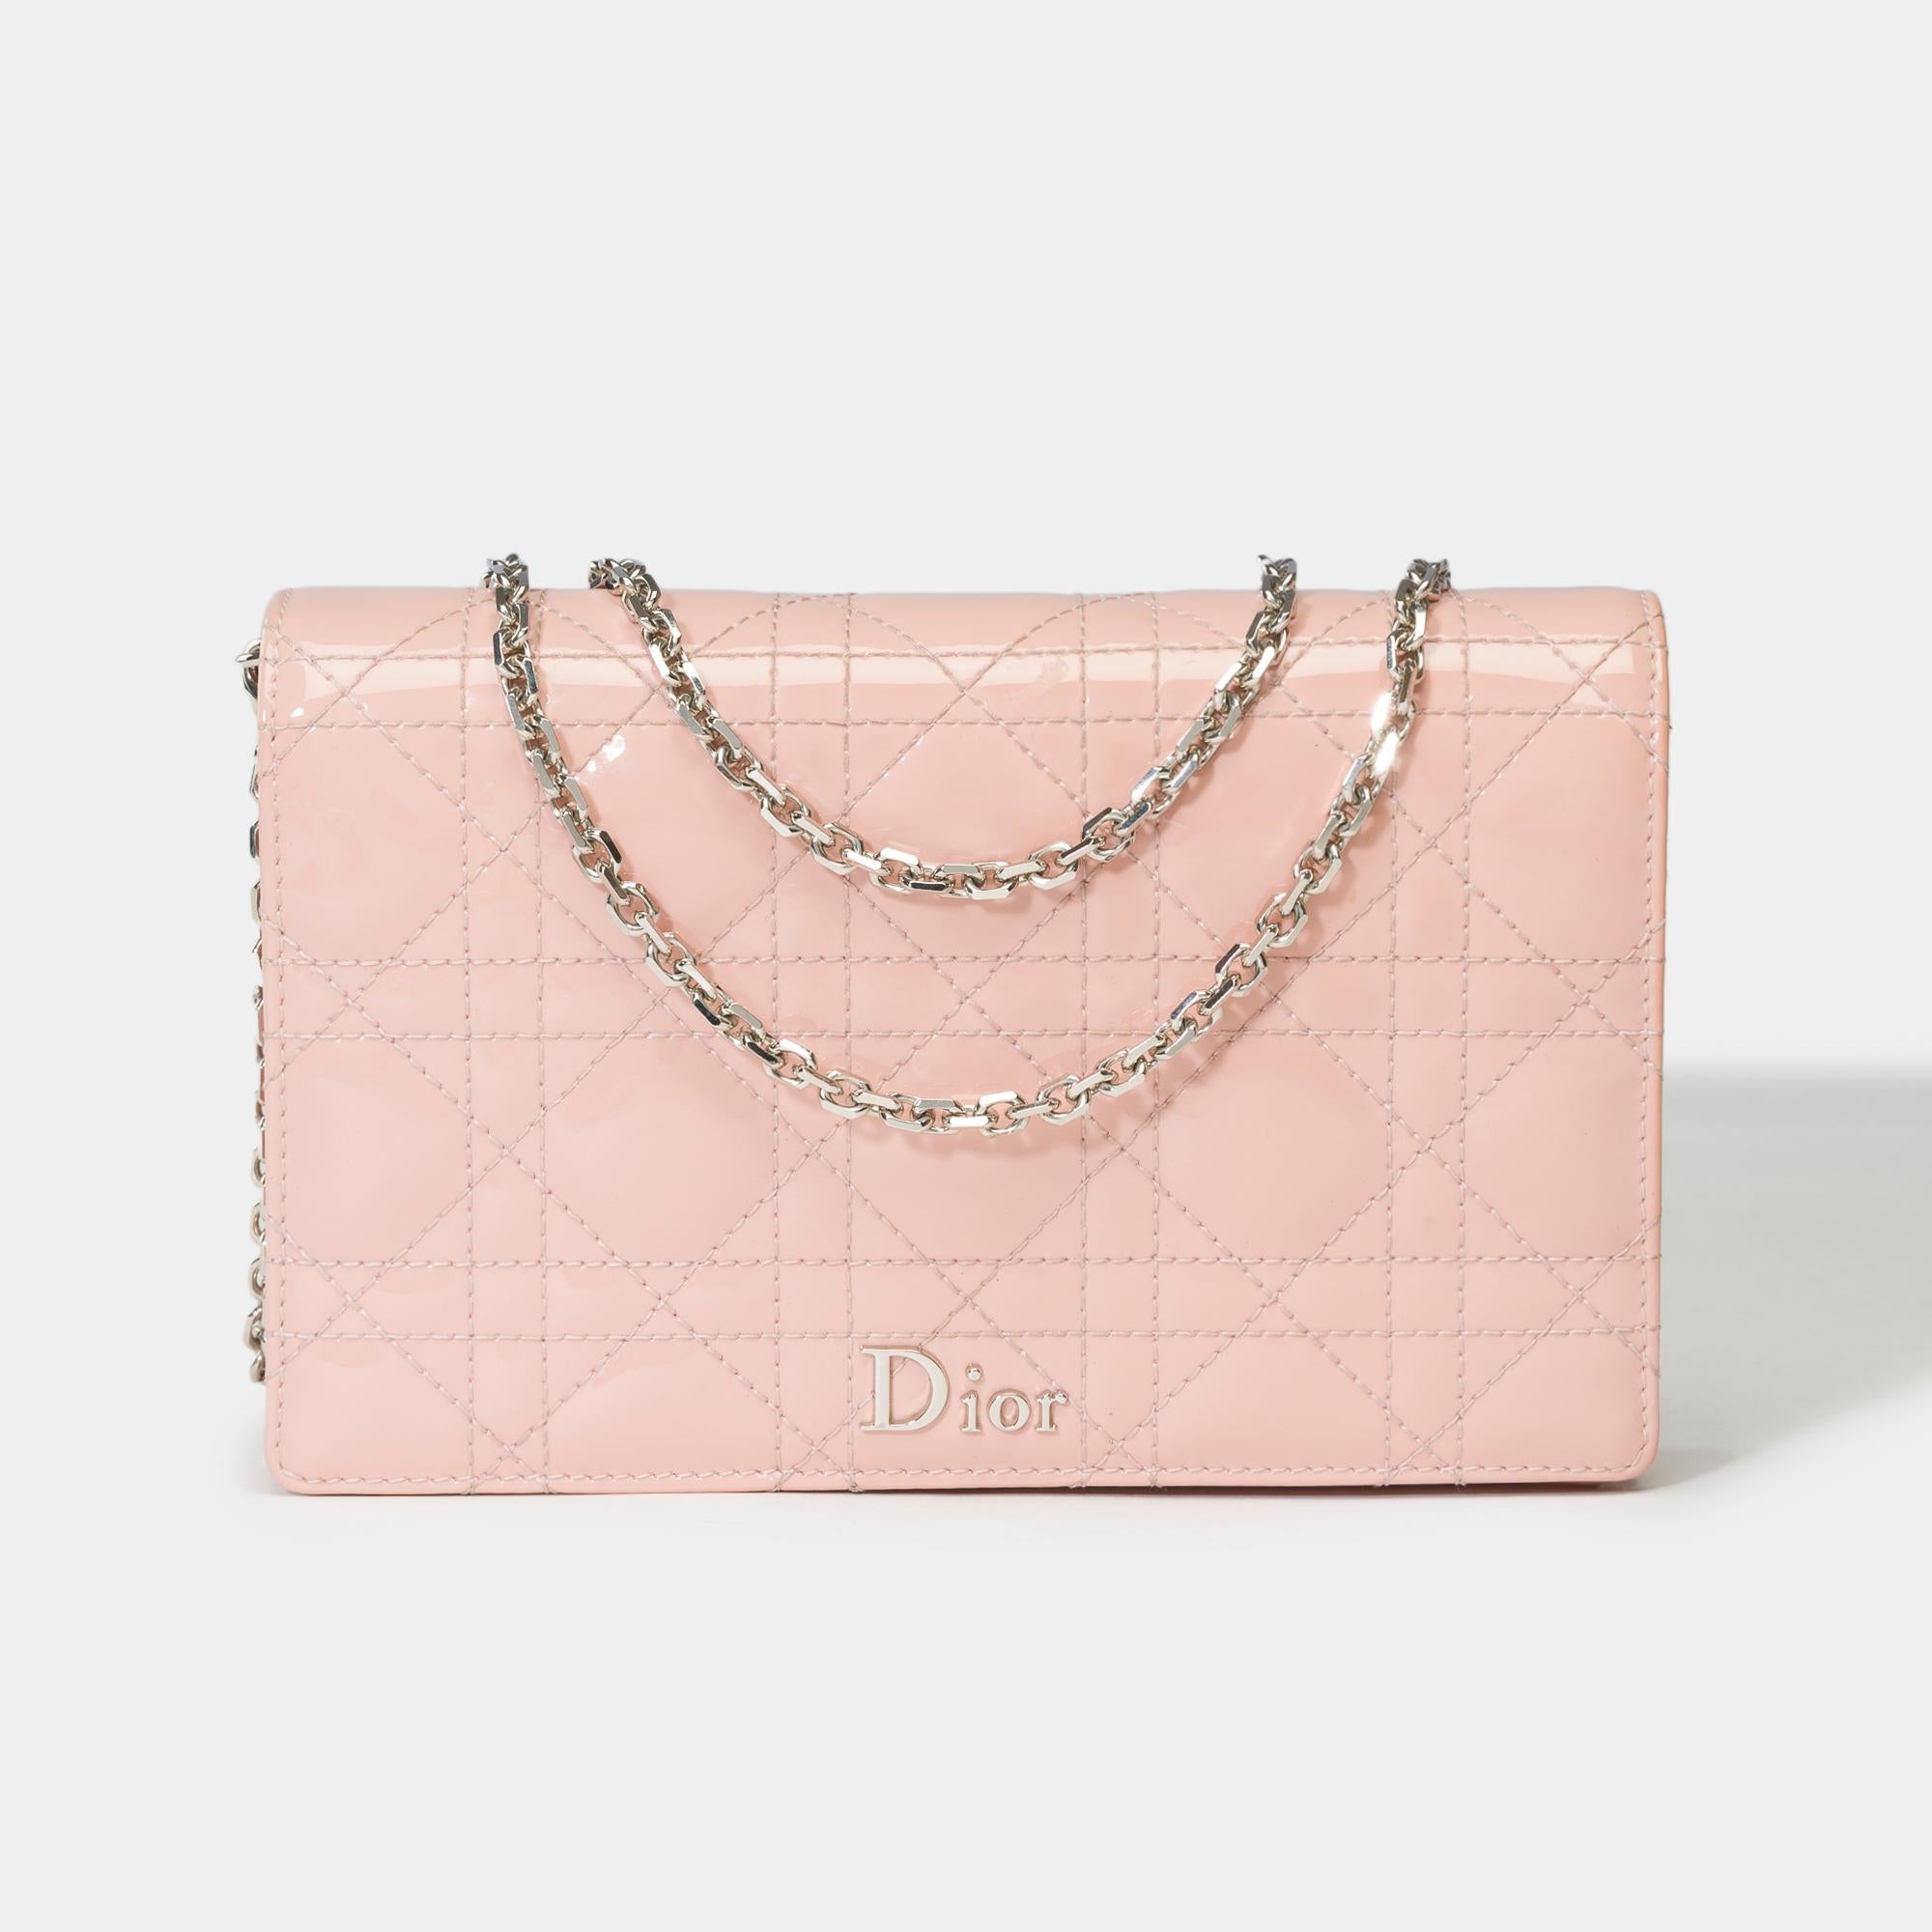 Gorgeous​ ​Dior​ ​Wallet​ ​on​ ​chain​ ​in​ ​patent​ ​pink​ ​cane​ ​leather,​ ​chain​ ​handle​ ​in​ ​silver​ ​metal​ ​for​ ​a​ ​hand​ ​or​ ​shoulder​ ​or​ ​crossbody​ ​carry

Dior​ ​signature​ ​on​ ​the​ ​front​ ​in​ ​silver​ ​metal
2​